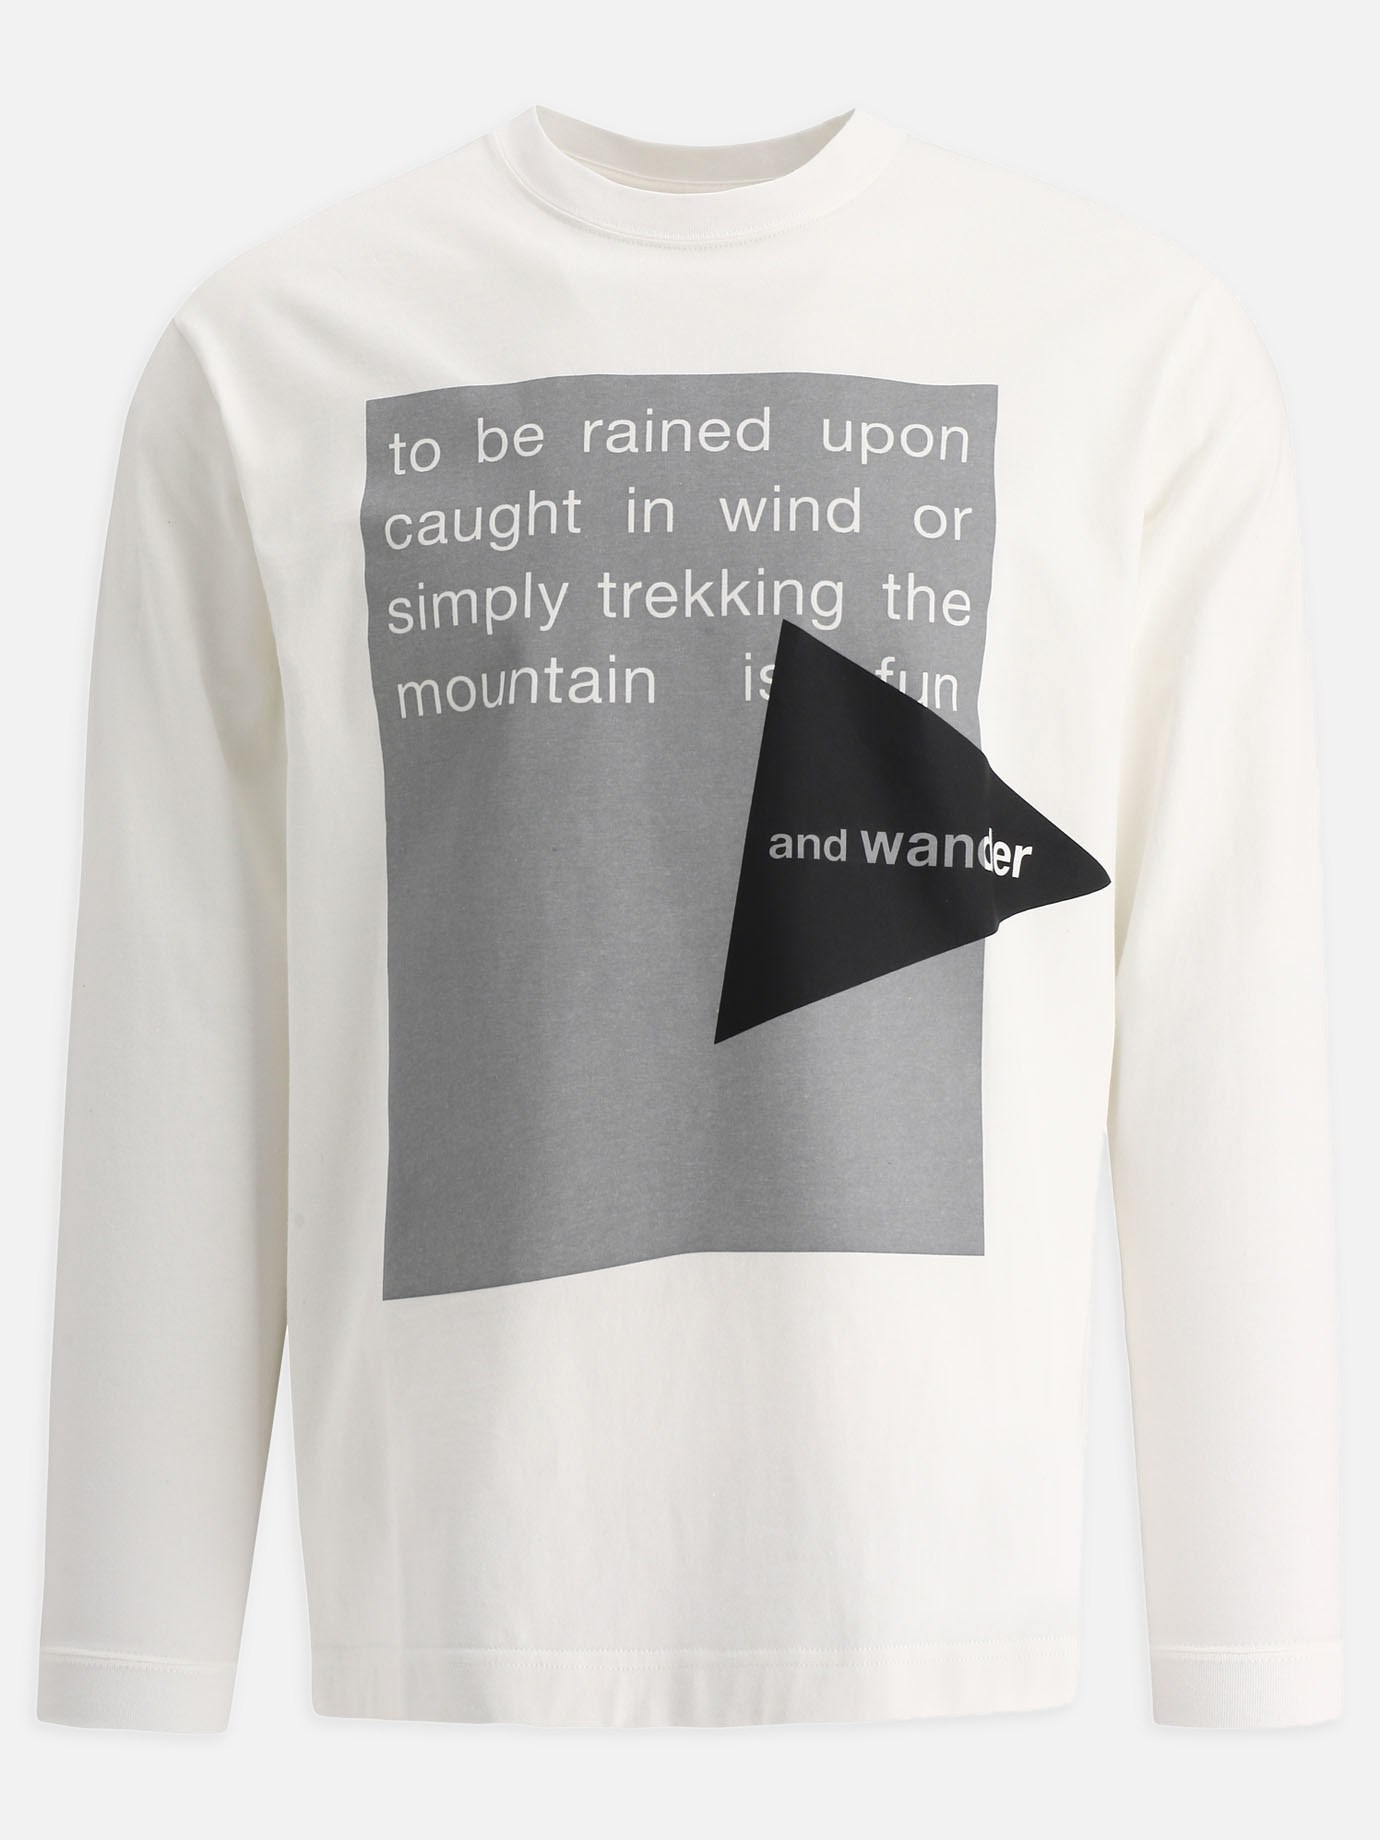  Reflective  t-shirtby and Wander - 4